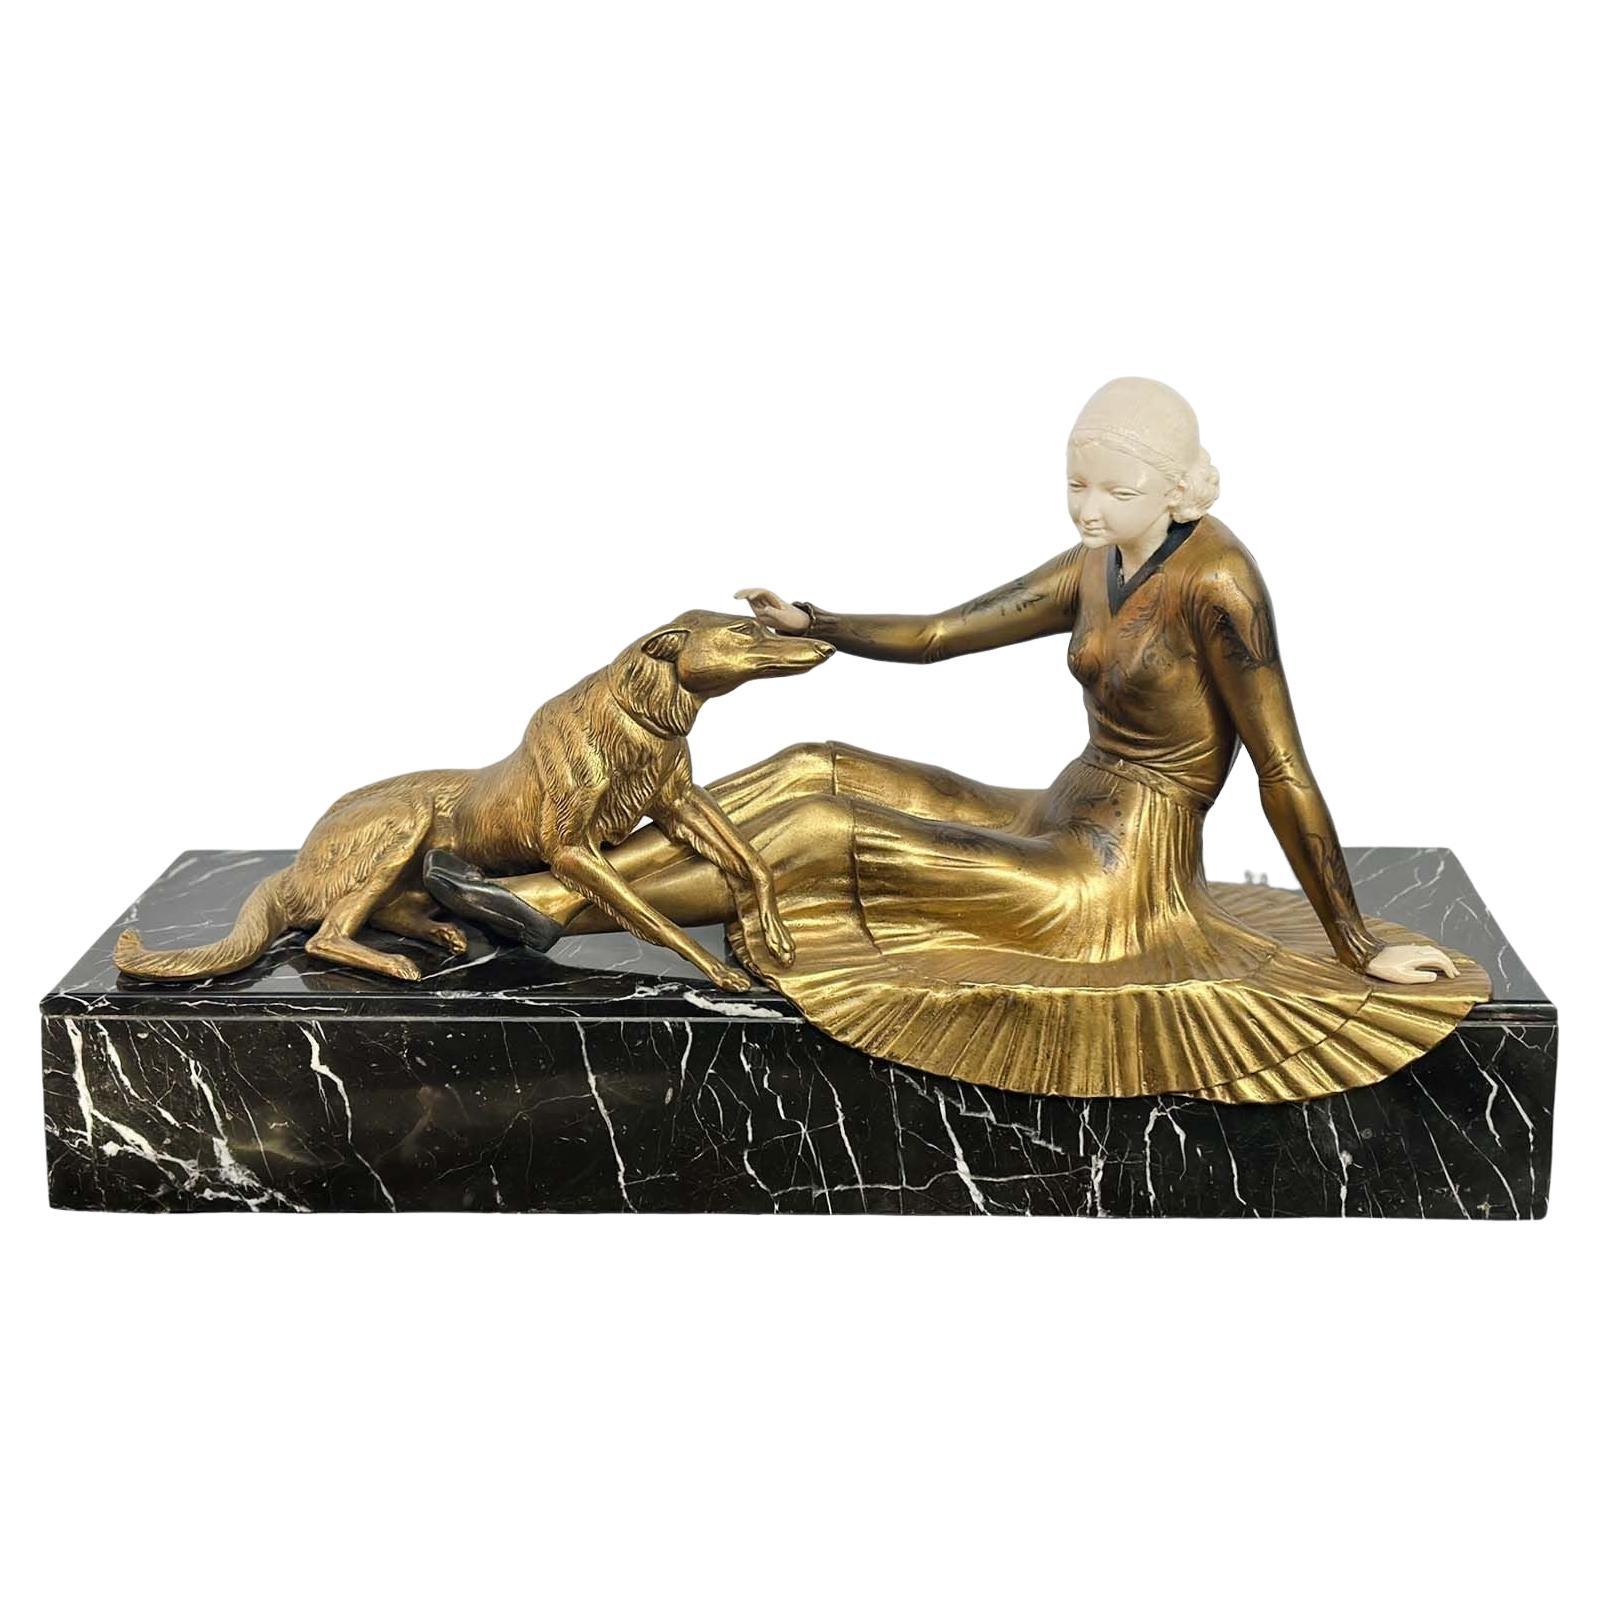 Art Deco Bronze Patina & Marble Sculpture of Women & Dog by Cham, c. 1920's